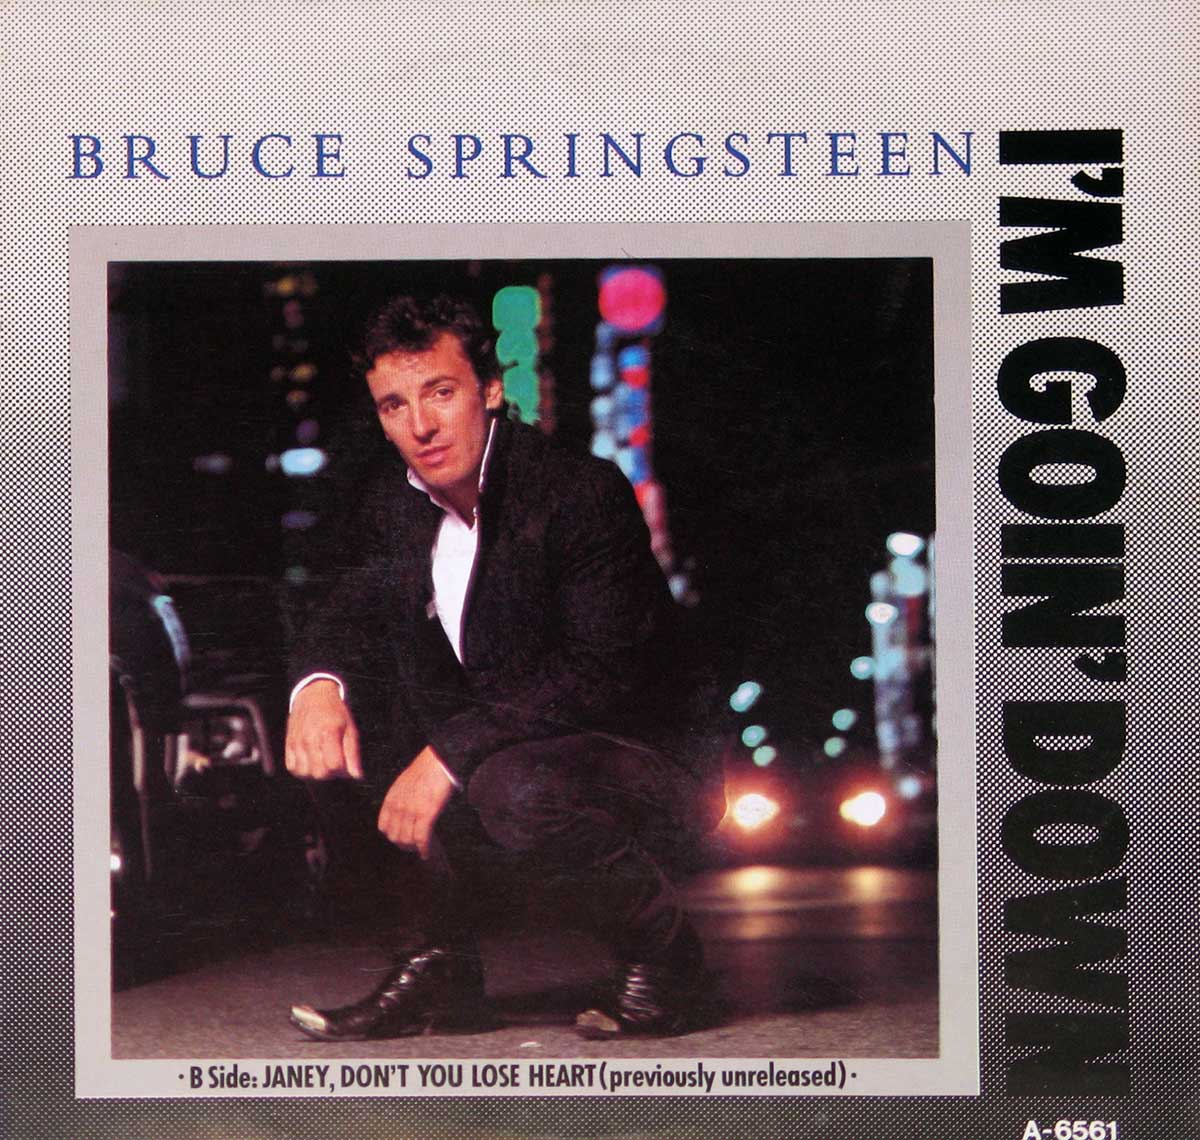 large album front cover photo of: Bruce Springsteen I'm goin' down / Janey Don't You Lose Heart 7" Picture SLeeve Vinyl SIngle 